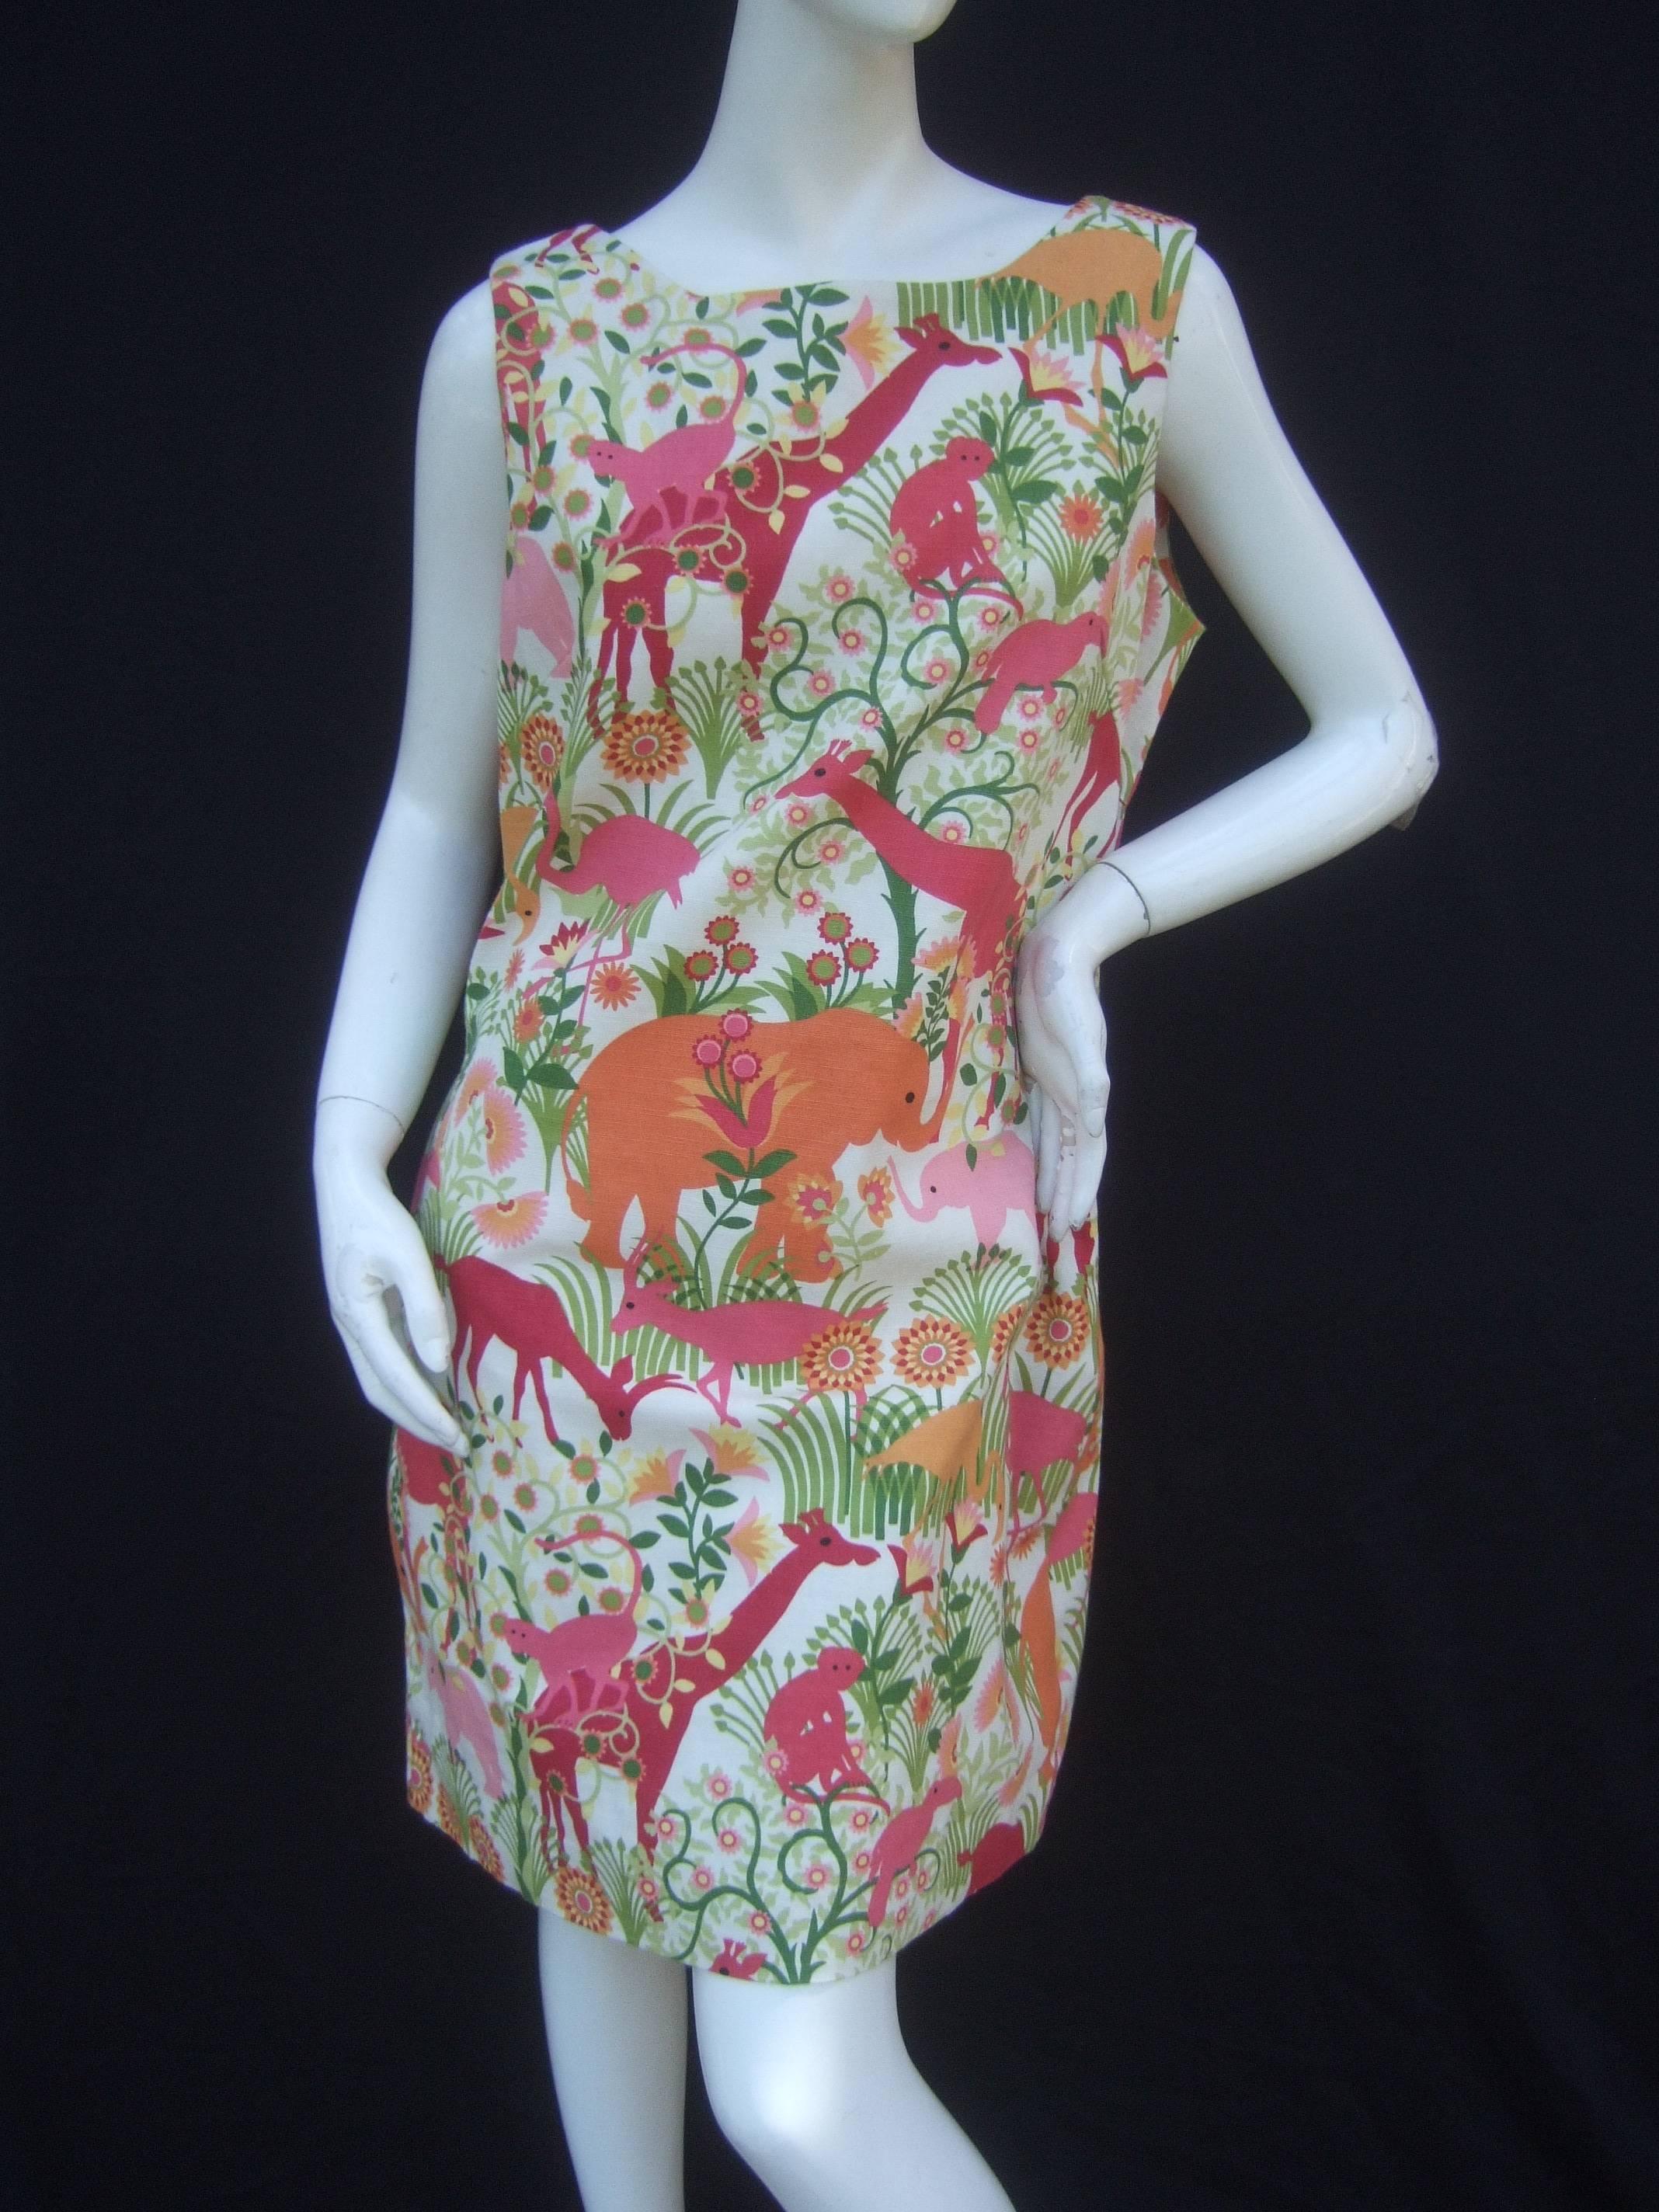 Charming jungle print cotton sheath dress
The fun summer sheath is illustrated with
a menagerie of exotic wild animals; monkeys,
elephants, giraffes, wading birds, and gazelles 

The collection of animals are exploring in a 
jungle paradise